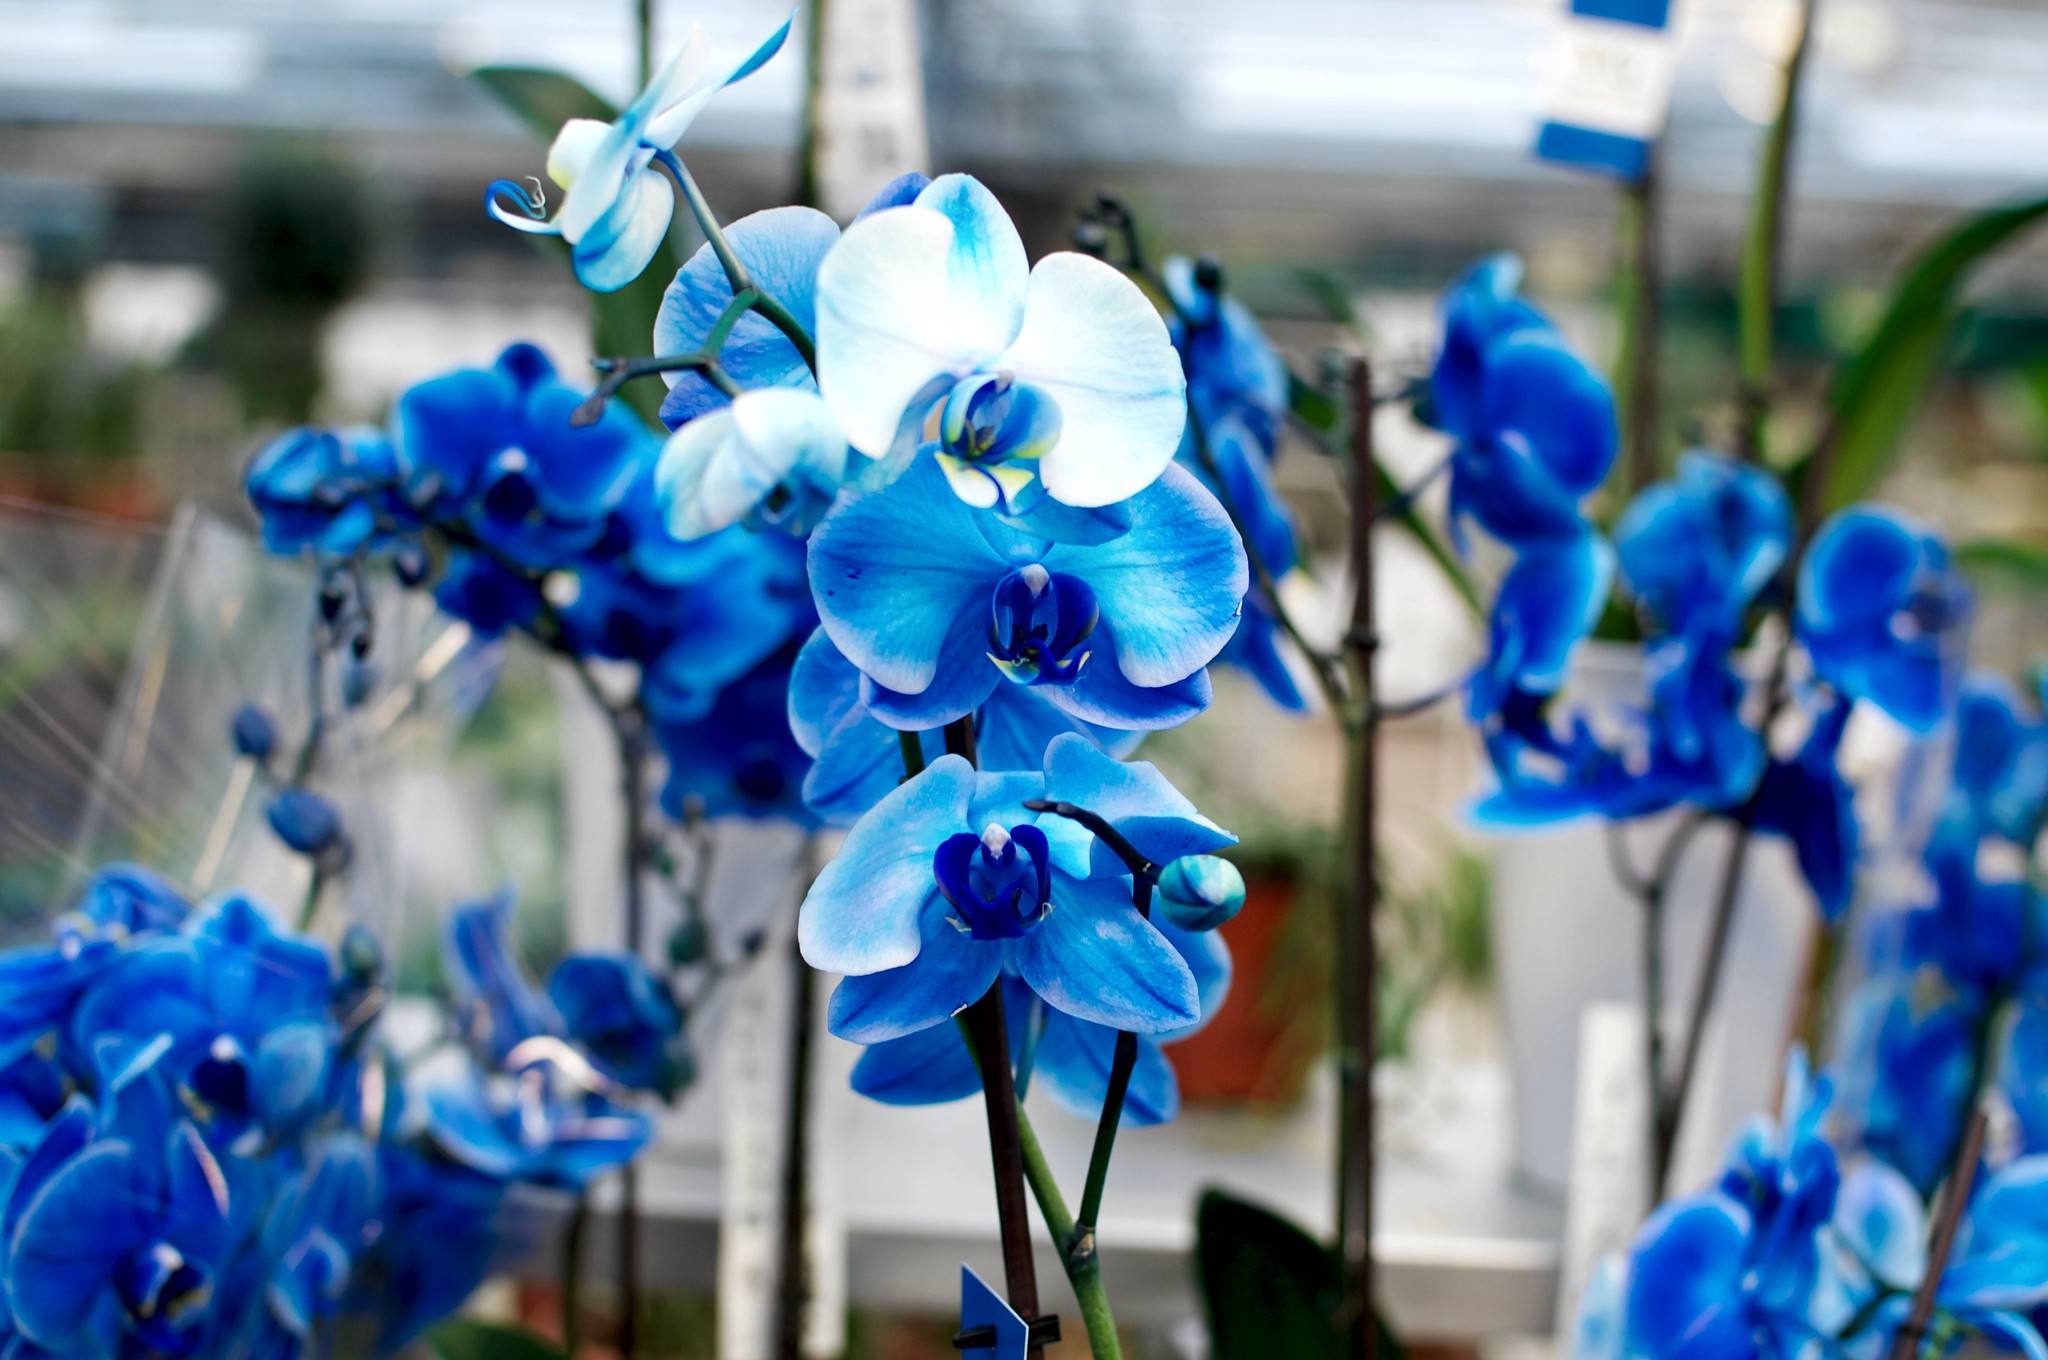 Our Love For Blue Flowers: It’s Complicated - Good Earth Plants
